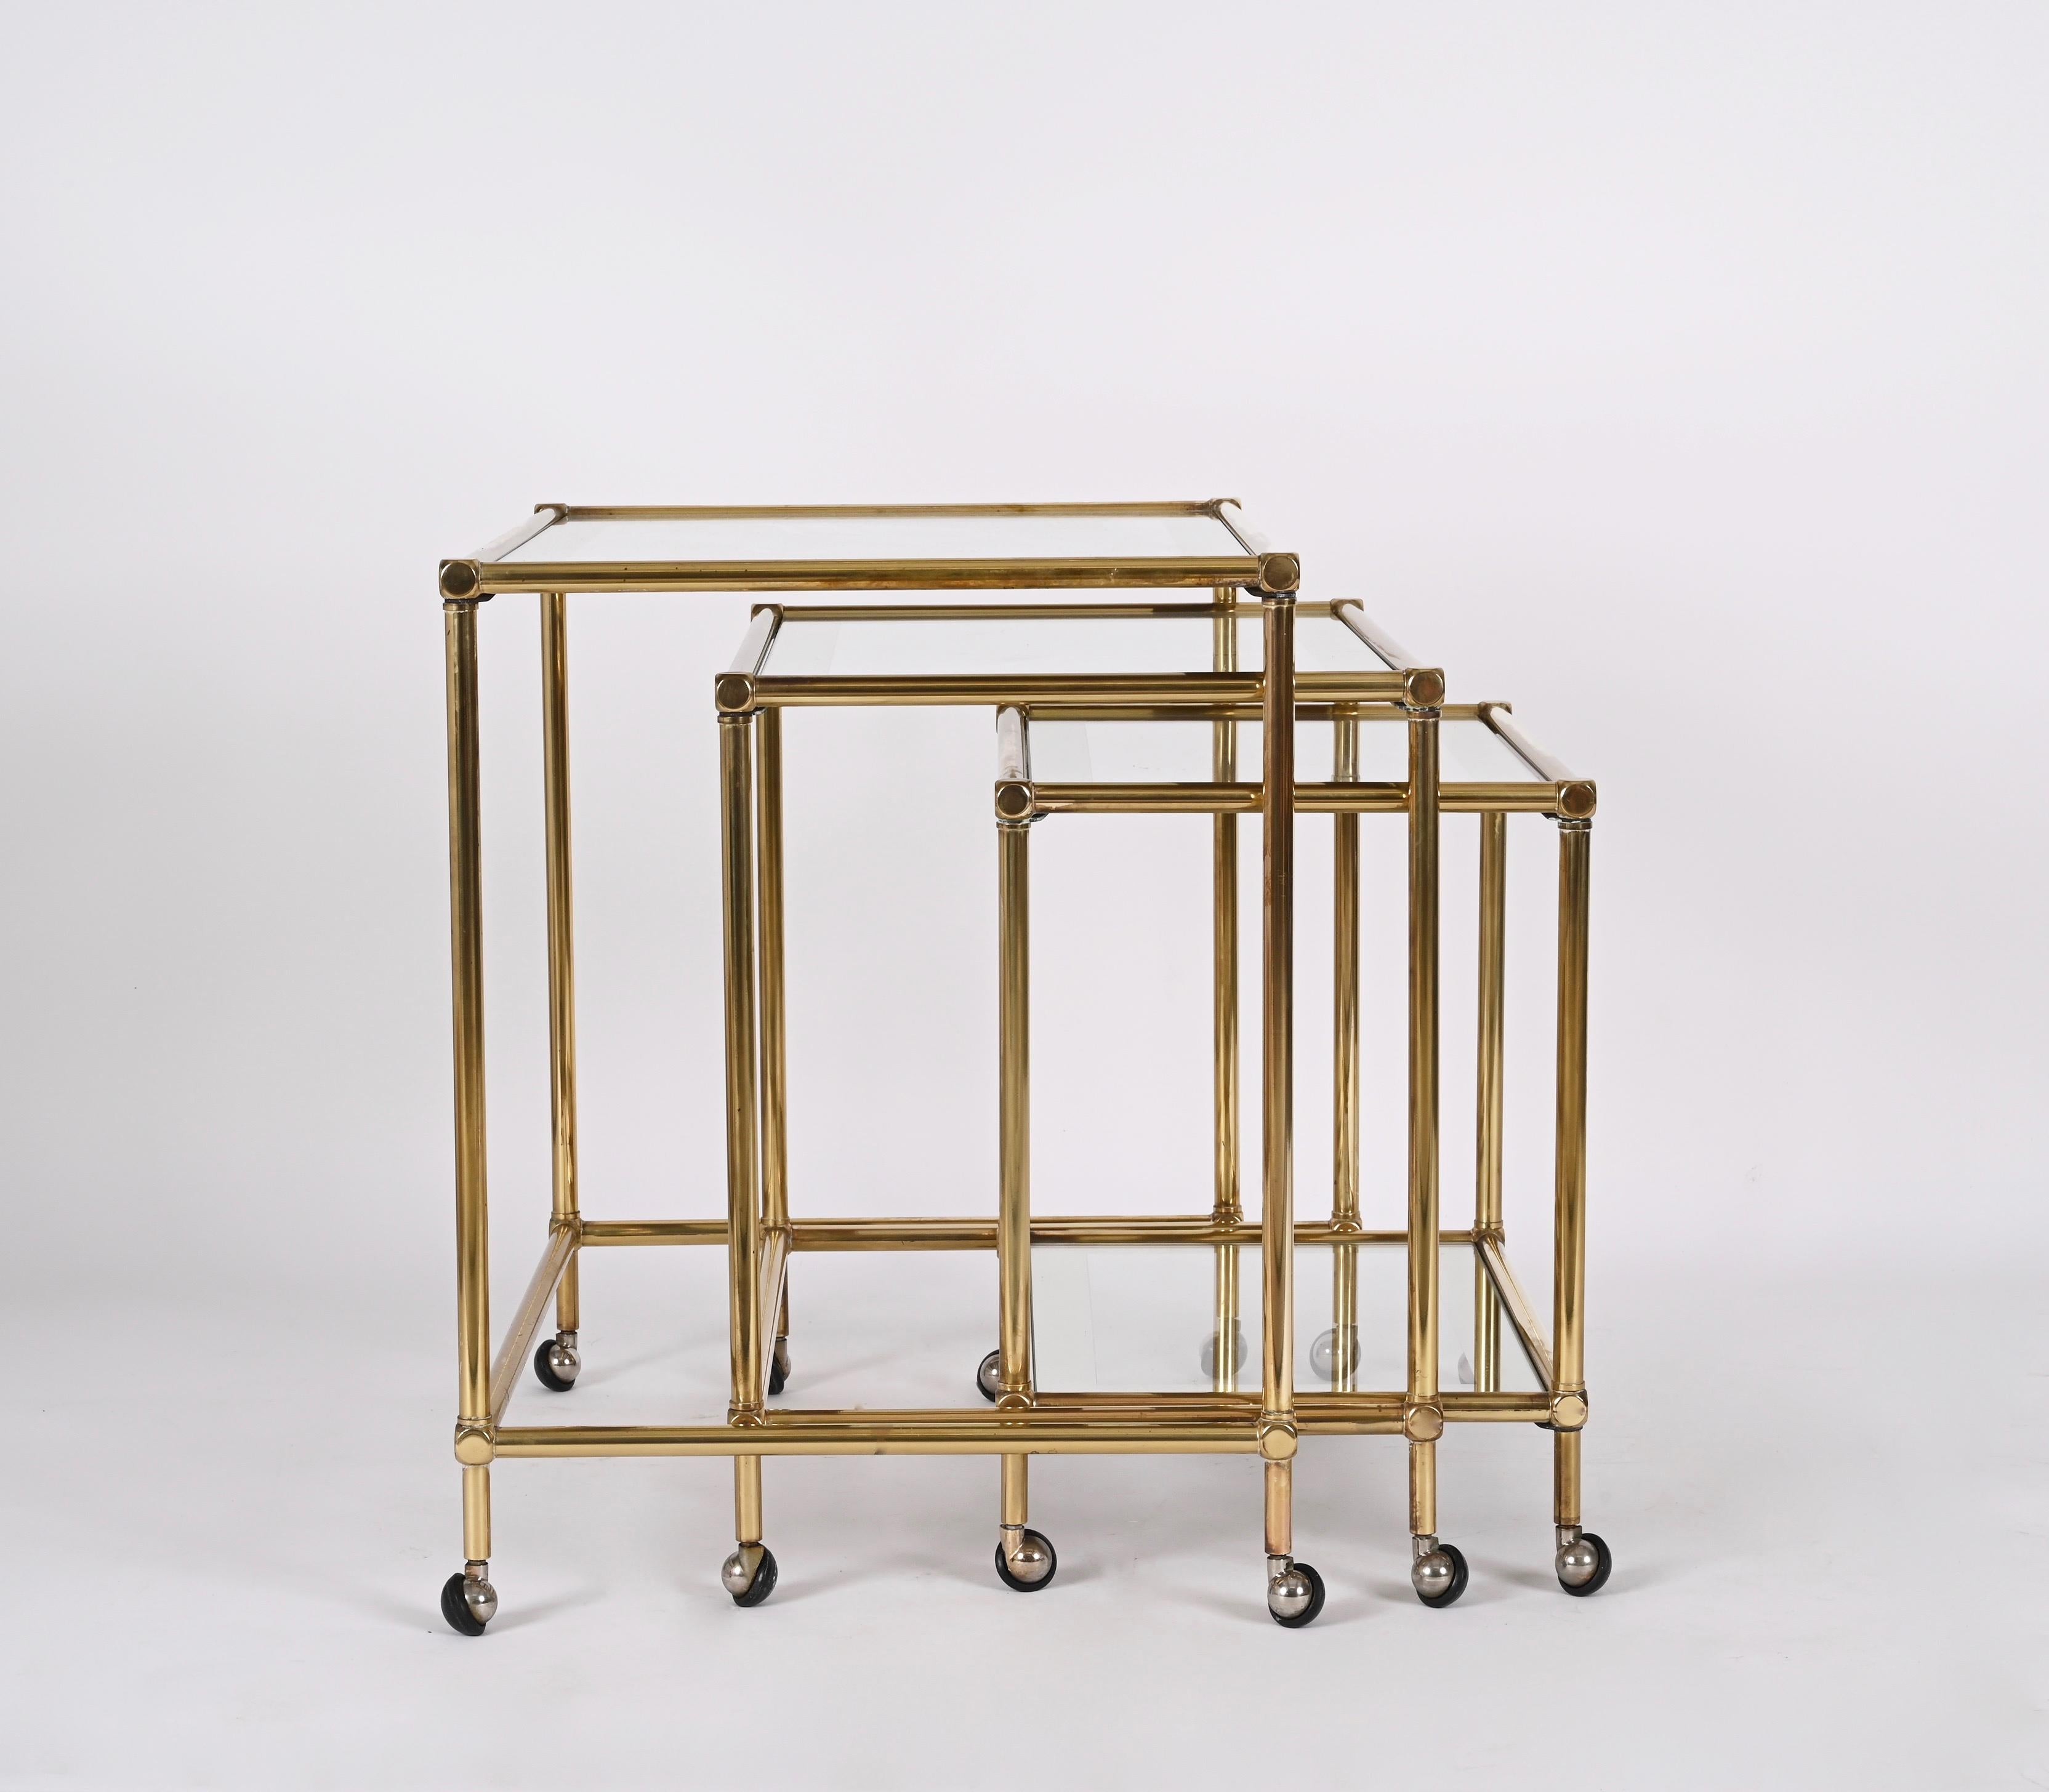 Set of Brass Mirrored Border with Glass Top Nesting Tables, Maison Jansen, 1970s For Sale 6